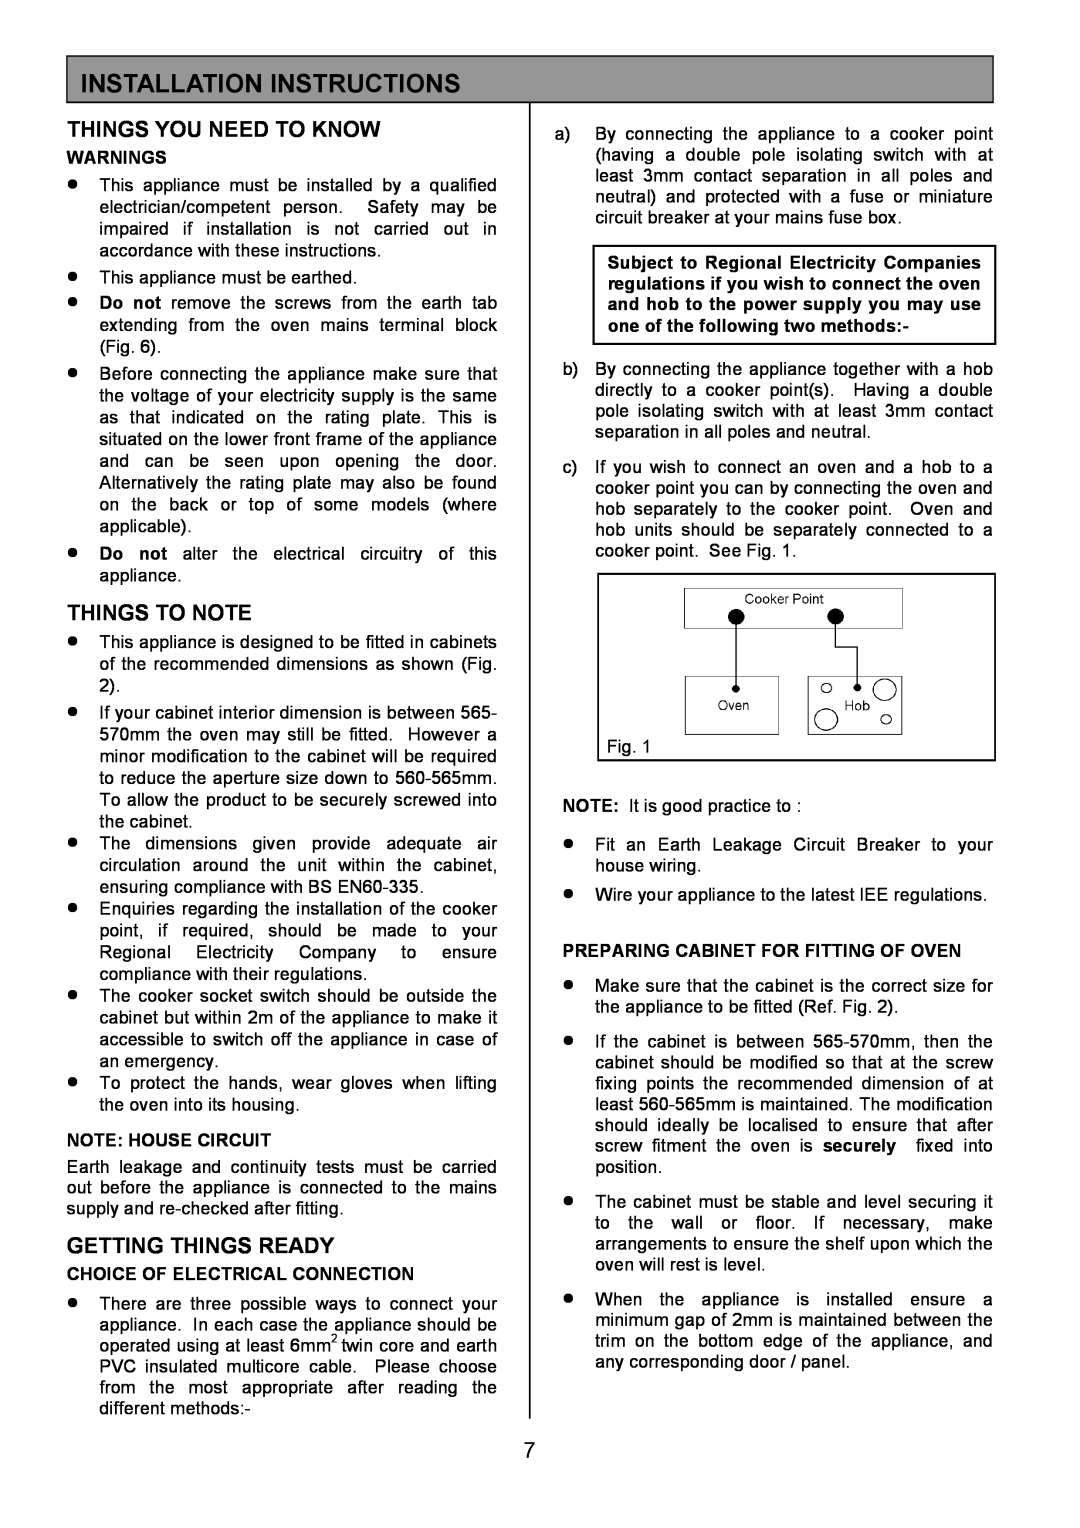 Electrolux EOD6390 Installation Instructions, Things You Need To Know, Things To Note, Getting Things Ready, Warnings 